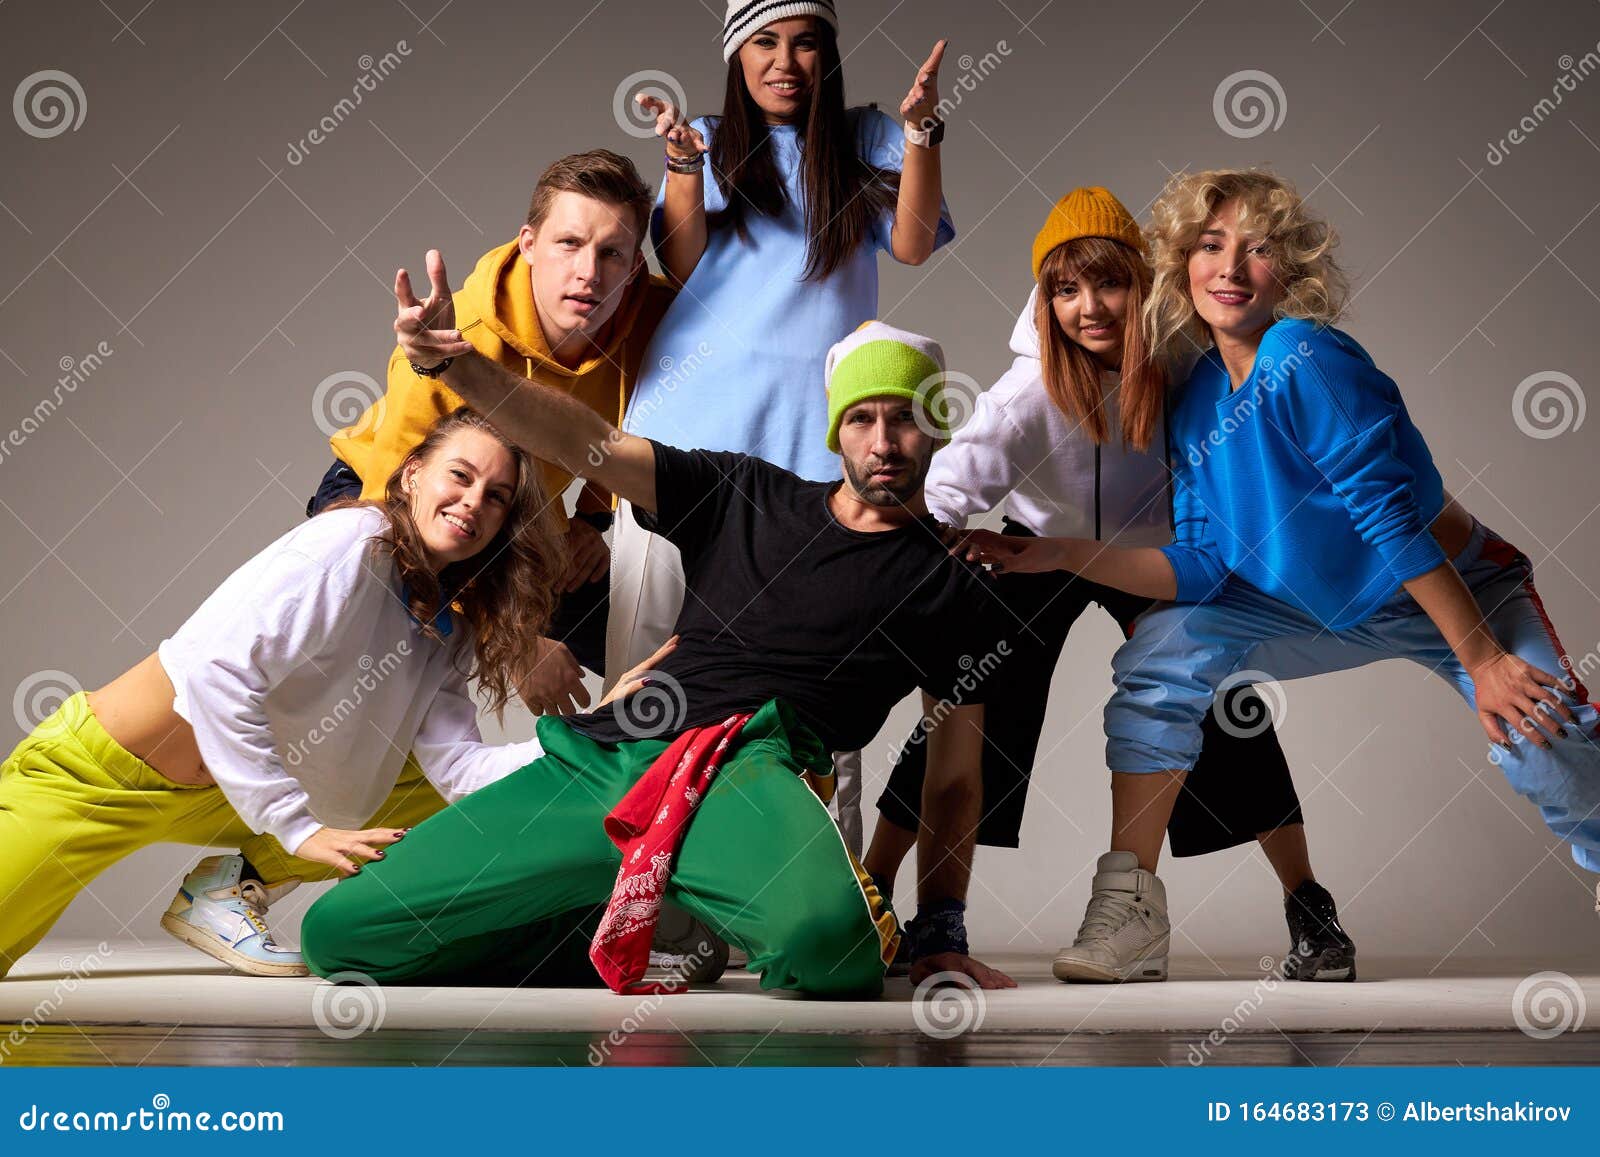 2,090 Stylish Cool Hip Hop Style Dancer Posing Stock Photos - Free &  Royalty-Free Stock Photos from Dreamstime